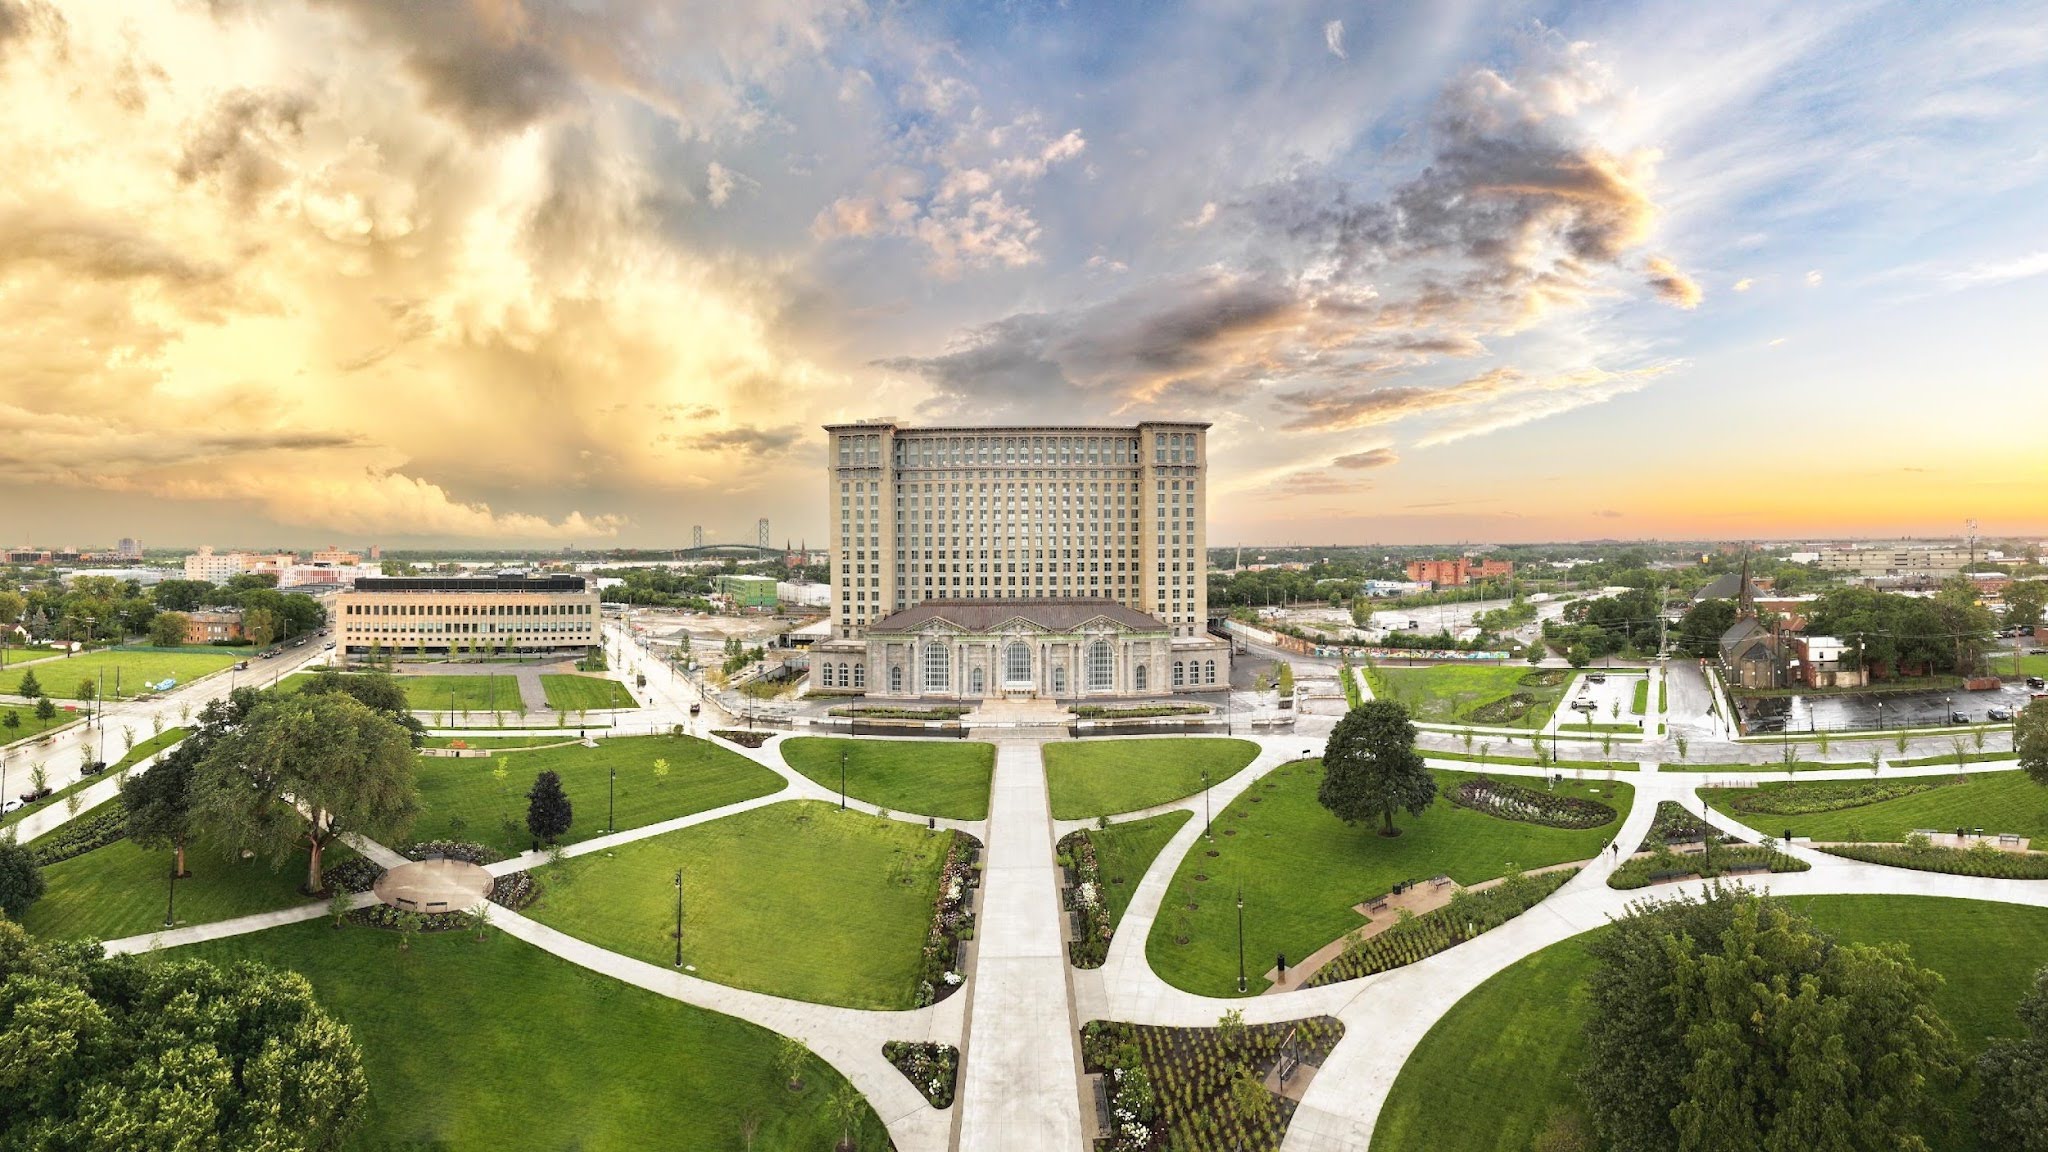 A wide image of Michigan Central Station and the park around it, with green grass and lots of walking paths.